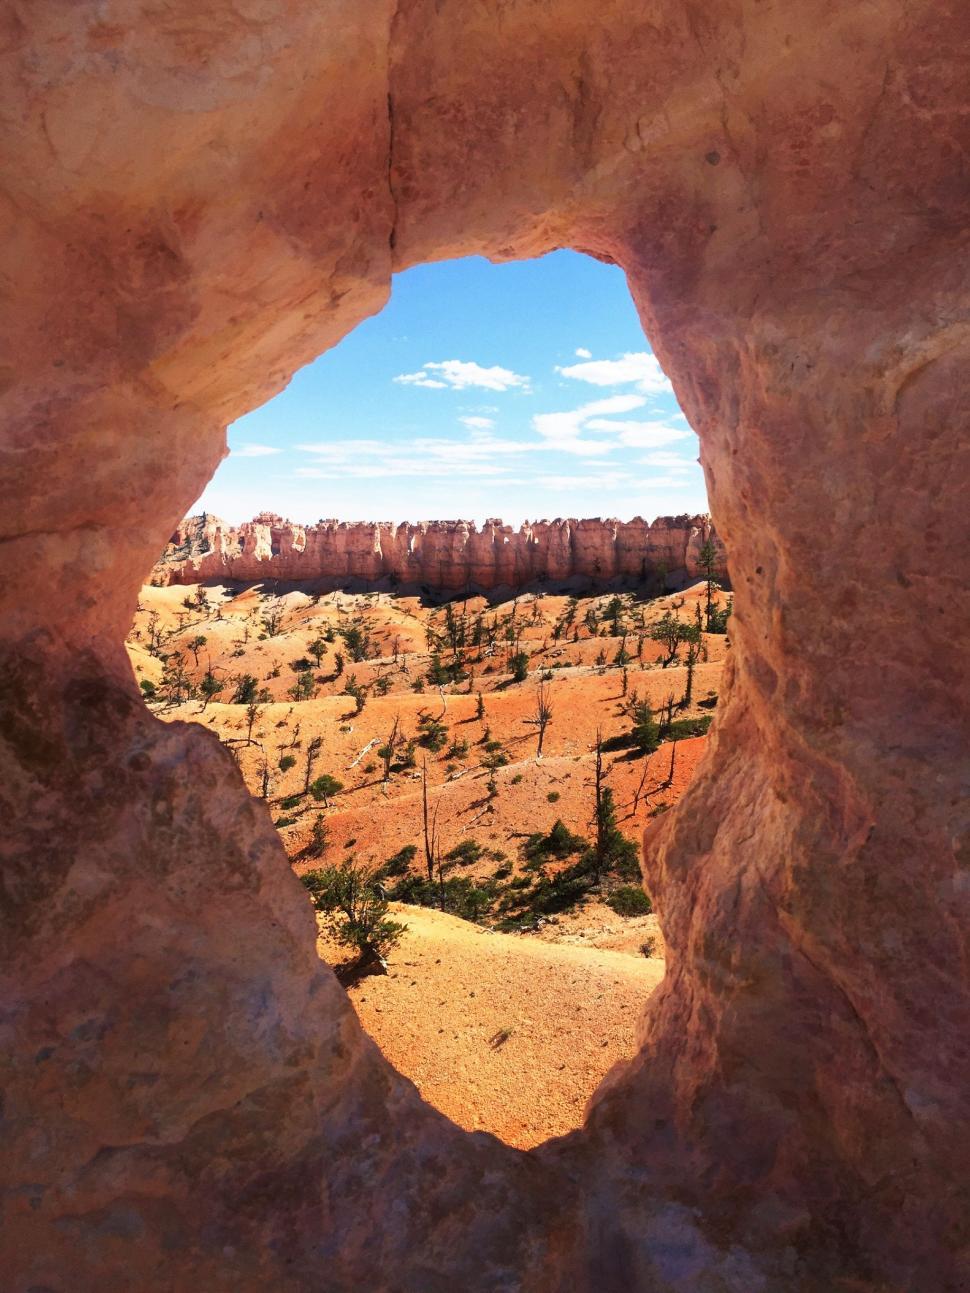 Free Image of Hole in the Rock Overlooking Desert Valley 